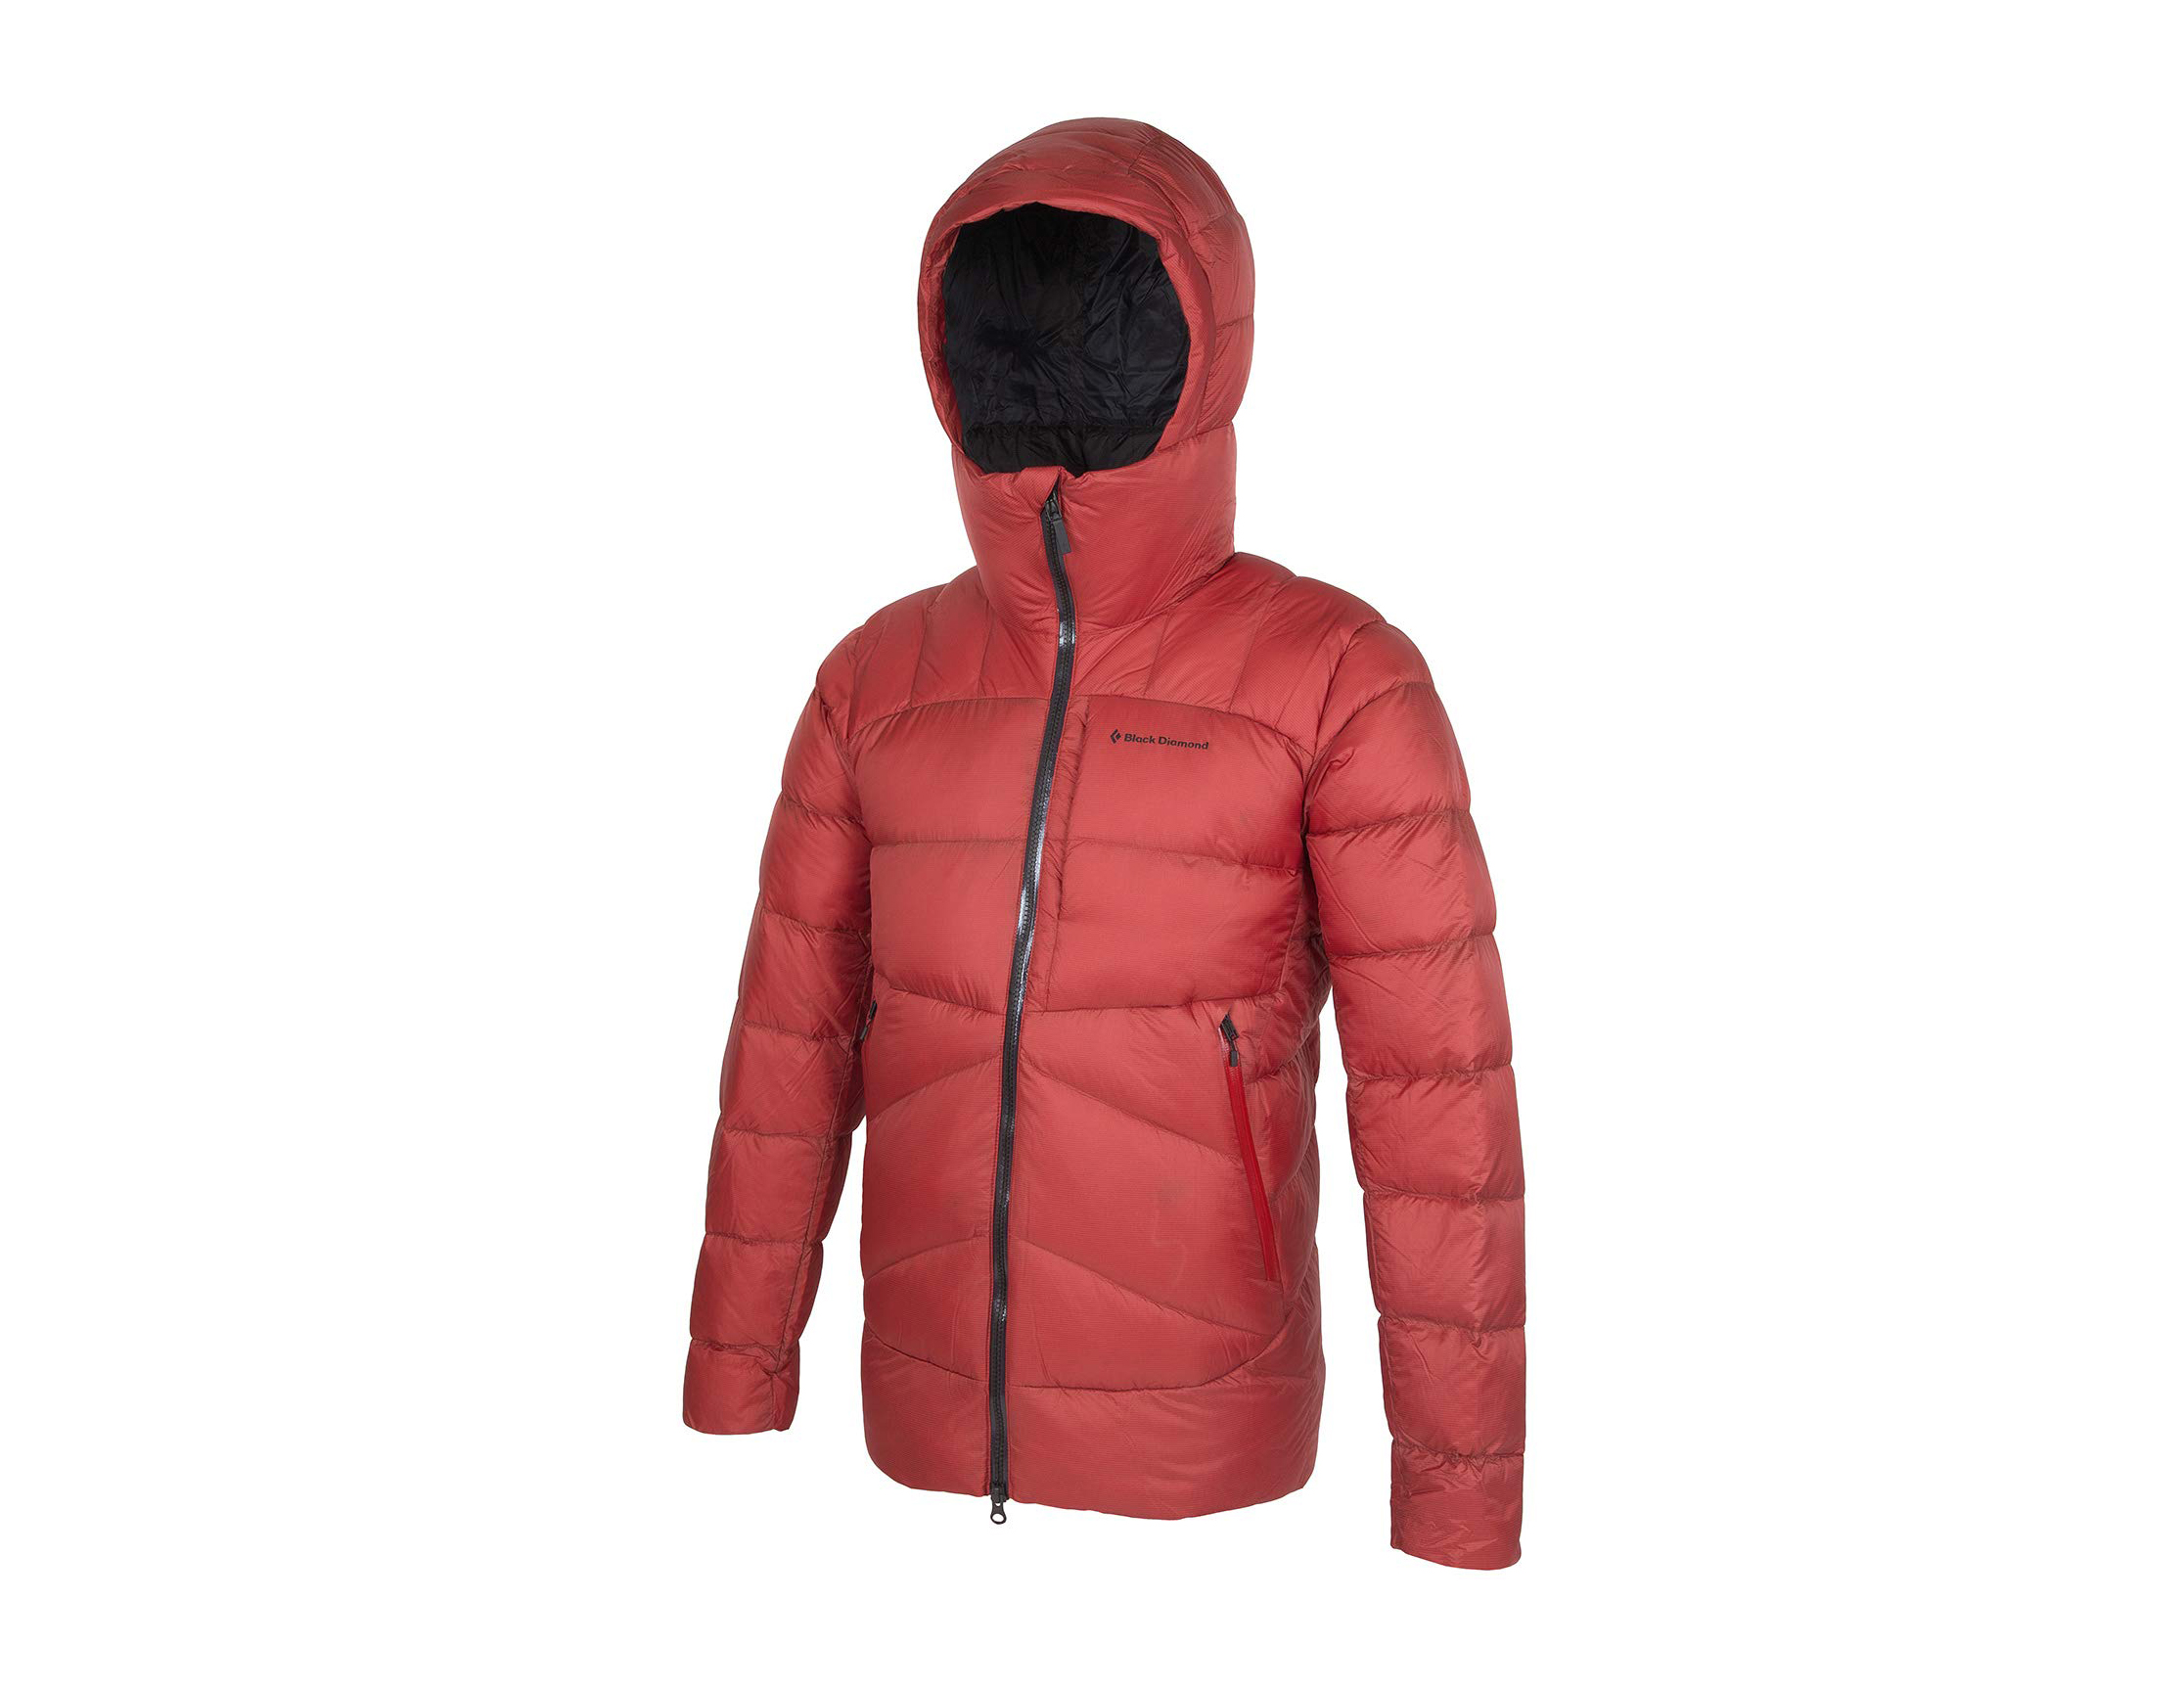 11 Best Down Jackets: Compare, Buy & Save (2022) | Heavy.com